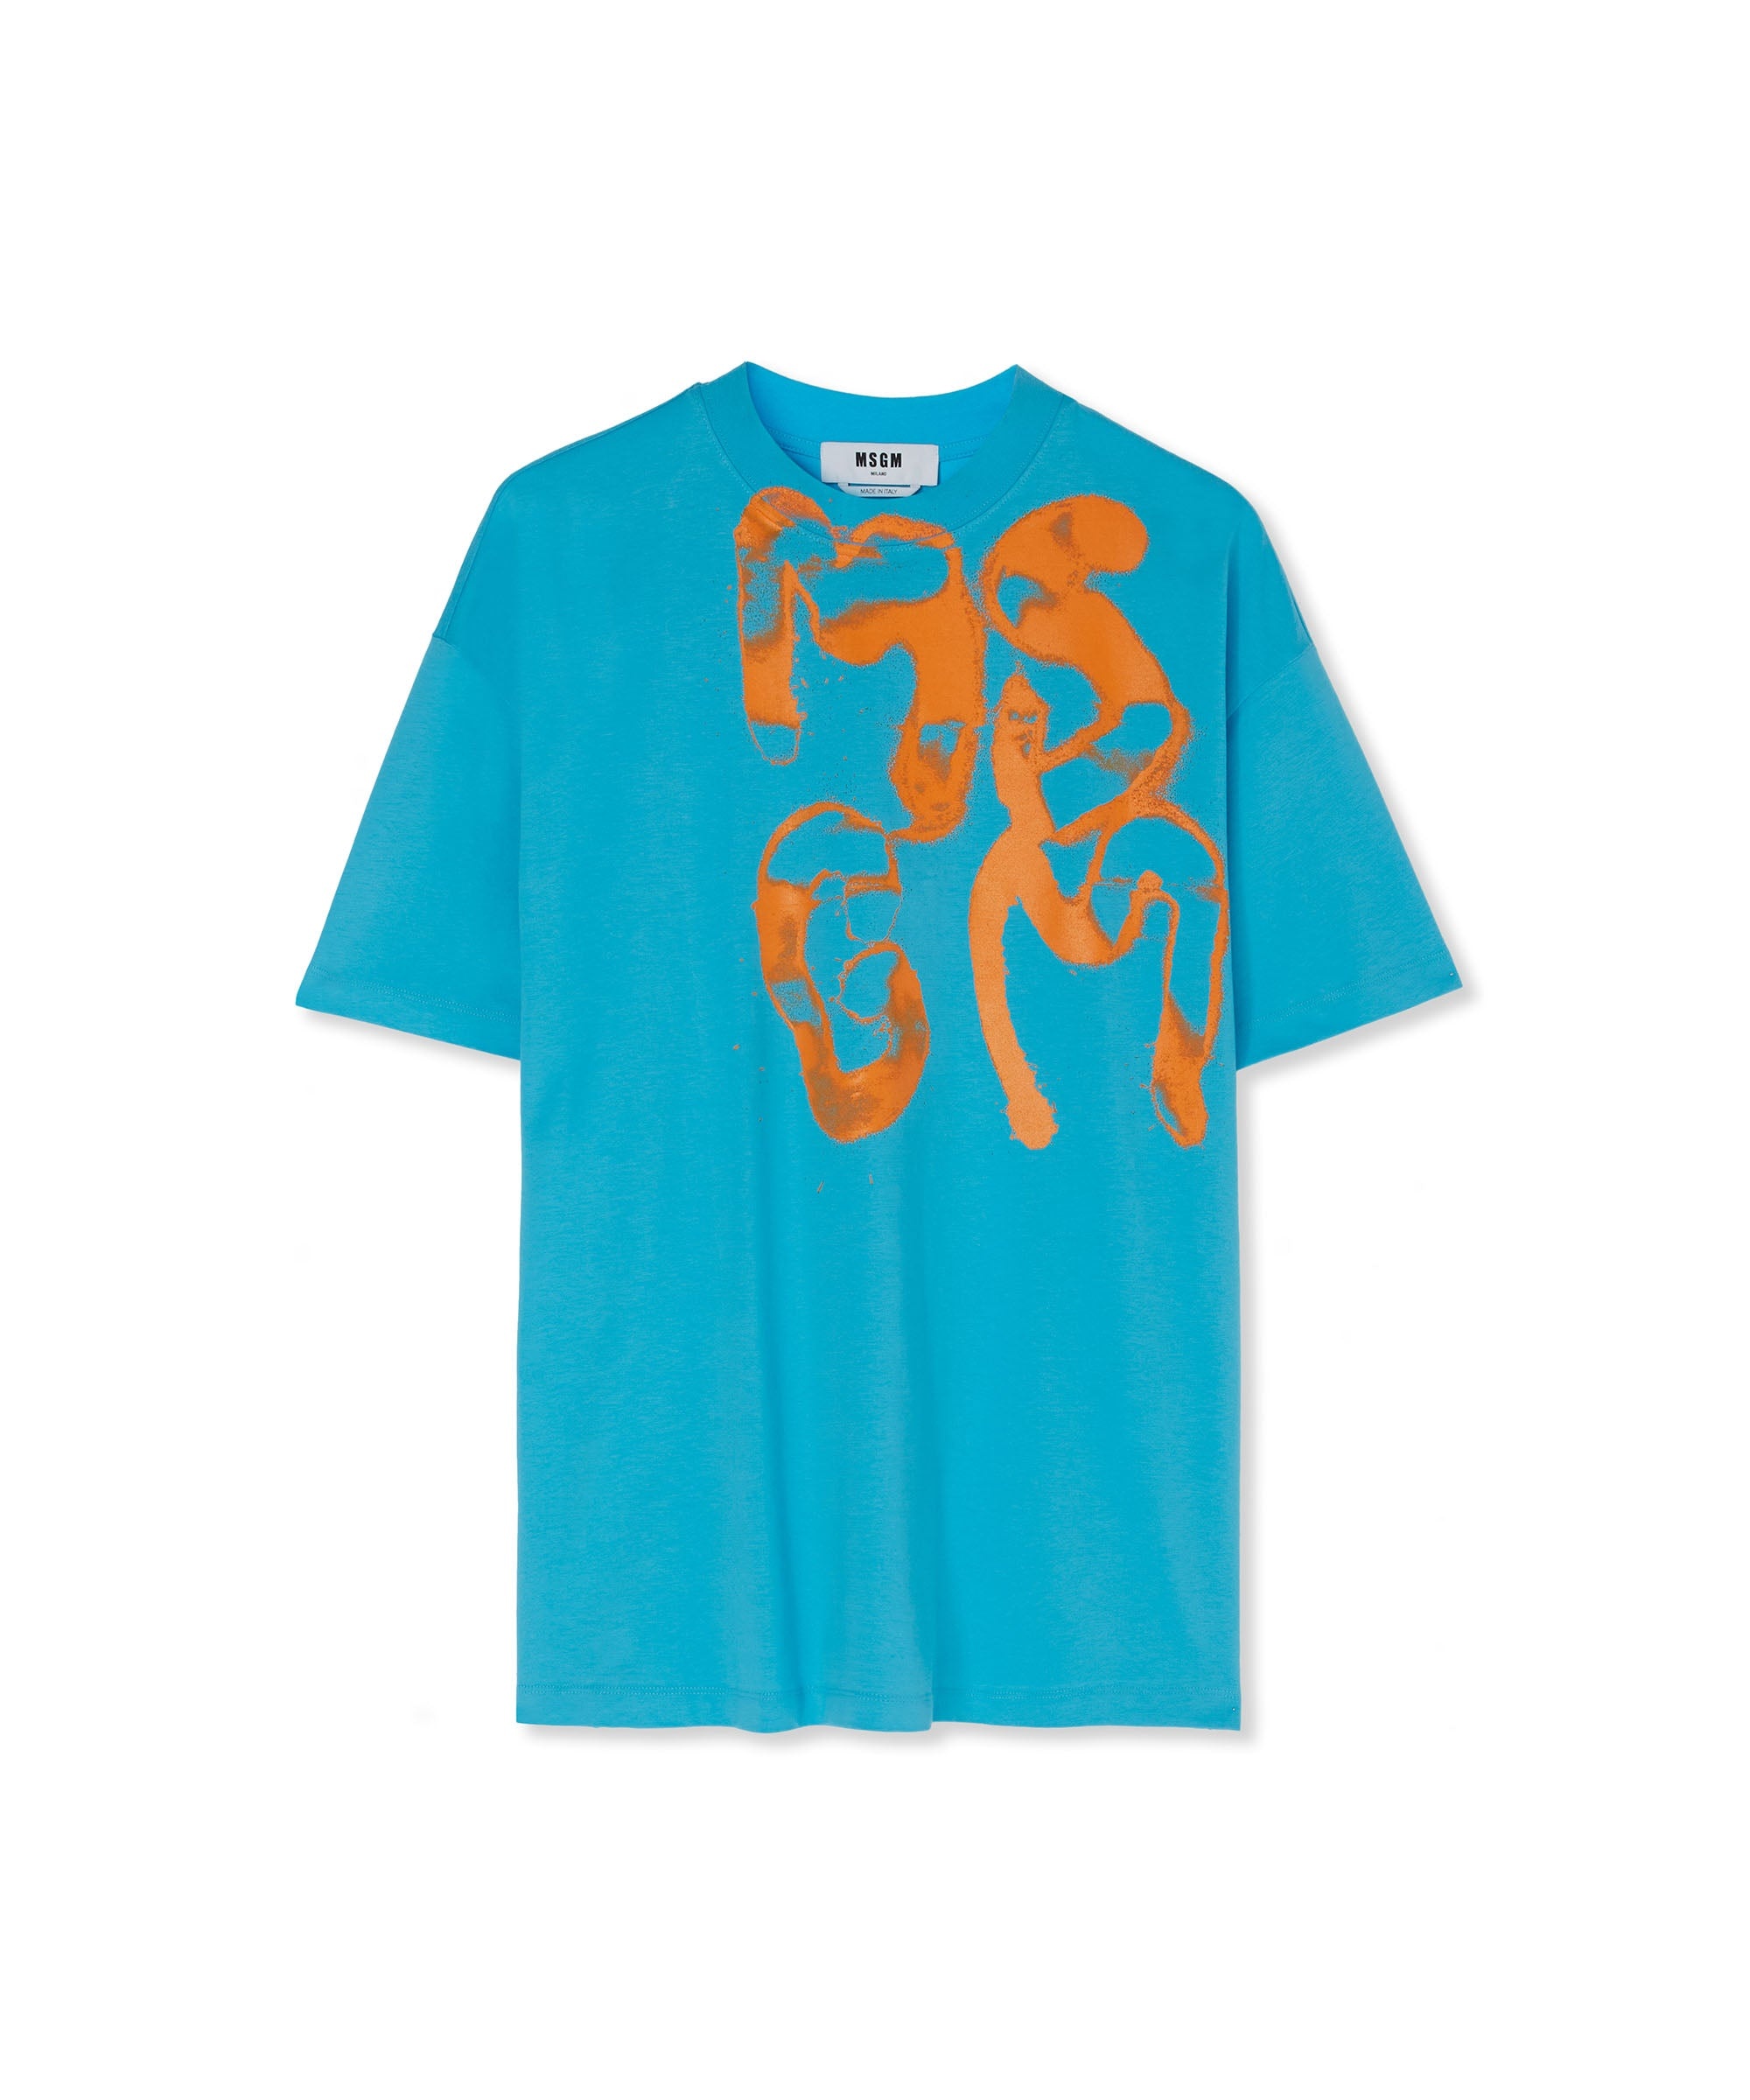 T-Shirt with "Spray logo" graphic - 1